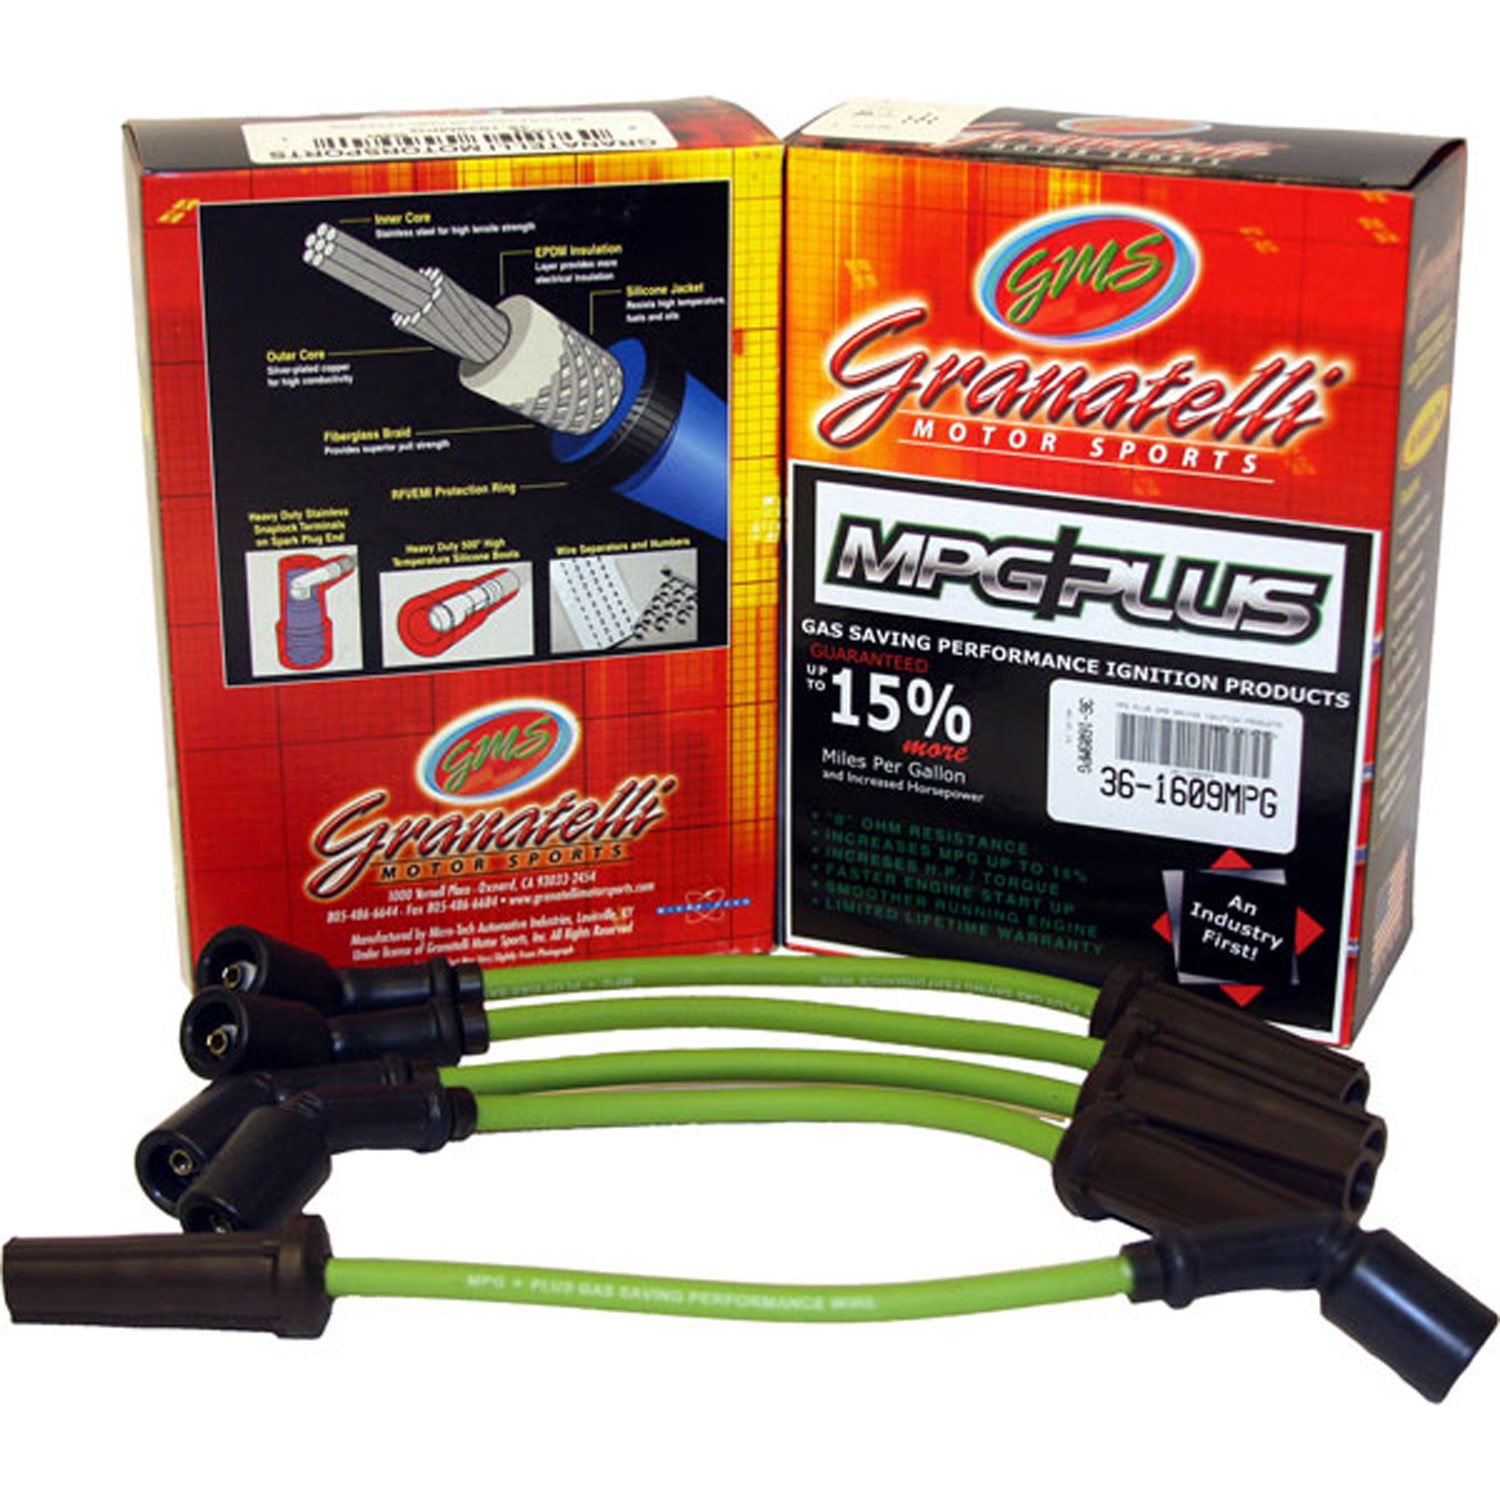 MPG Wires TOYOTA PICKUP 4CYL 2.4L 85-86